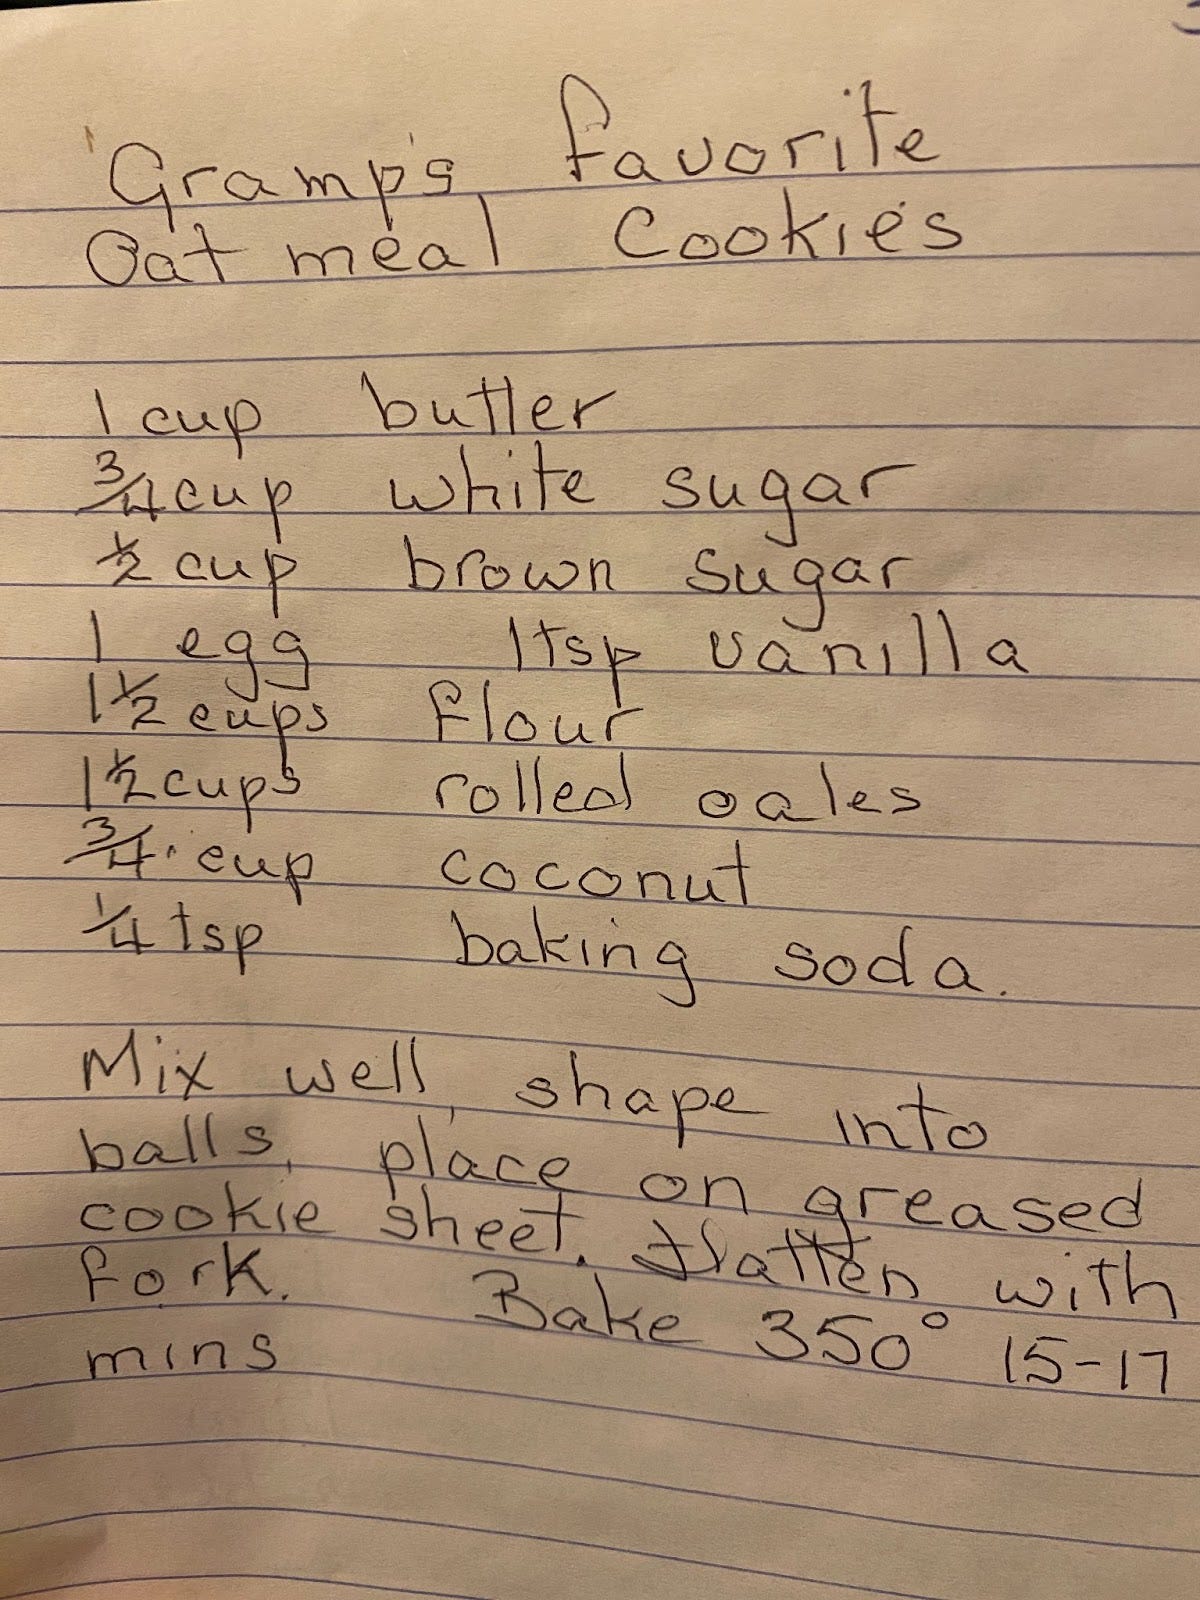 Gramp's Favourite Oatmeal Cookies 1 cup butter 3/4 cup white sugar 1/2 cup brown sugar 1 egg 1 tsp vanilla 1 1/2 cups flour 1 1/2 cups rolled oats 3/4 cup coconut 1/4 tsp baking soda Mix well shape into balls, place on a greased sheet, flatten with a fork bake at 350 degrees 15-17 minutes